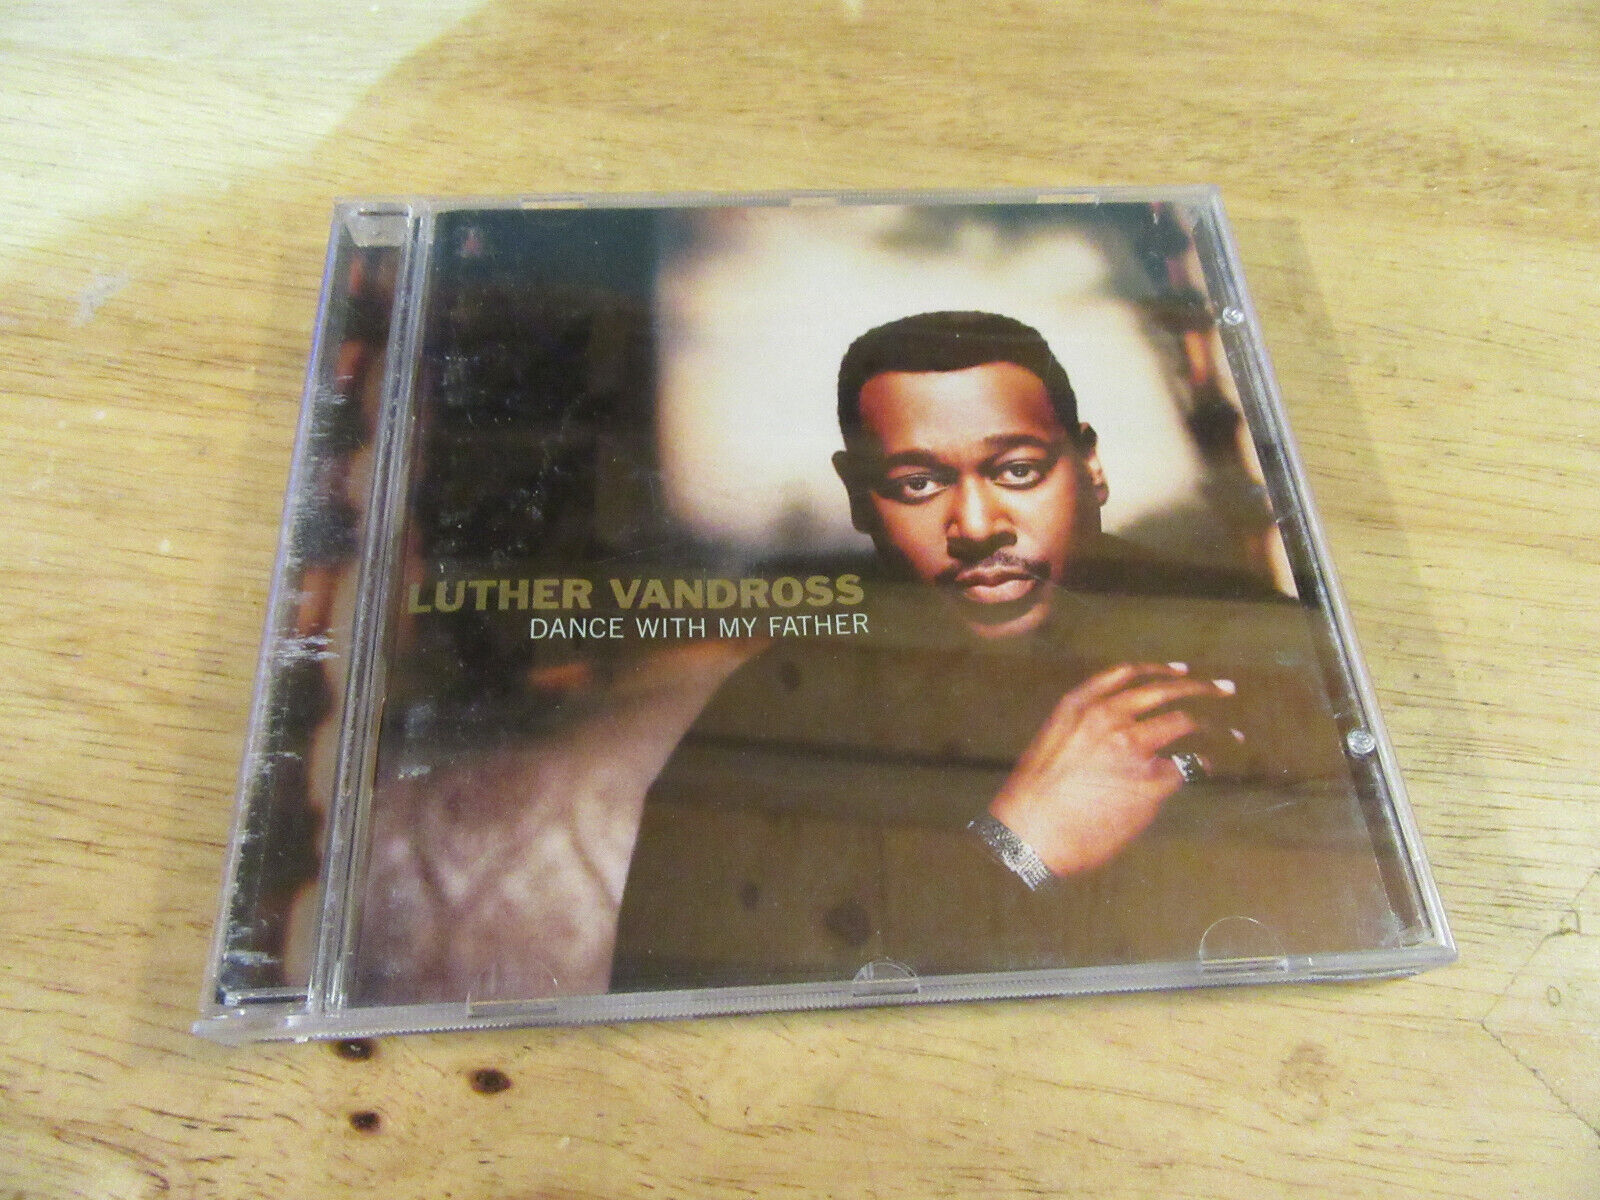 Luther Vandross - Dance With My Father - CD